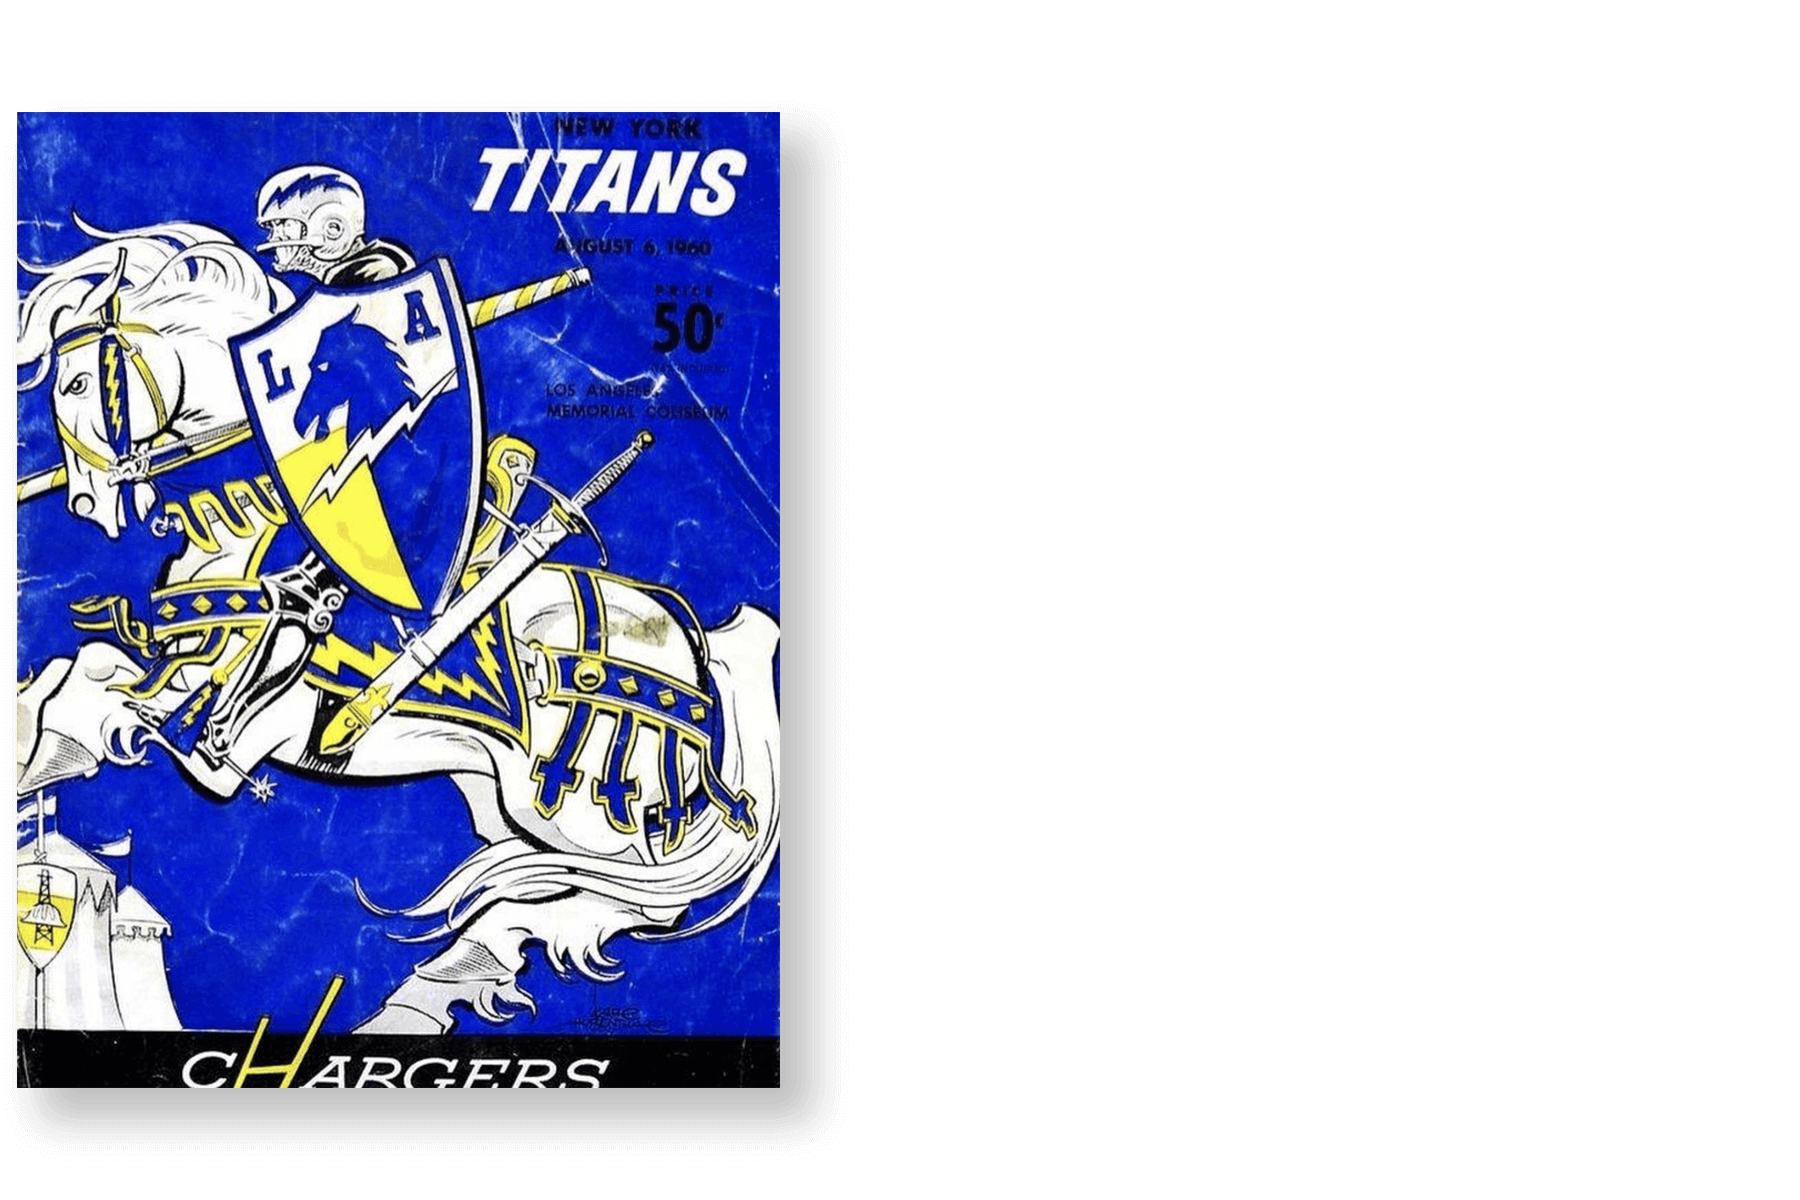 Chargers Take on Titans